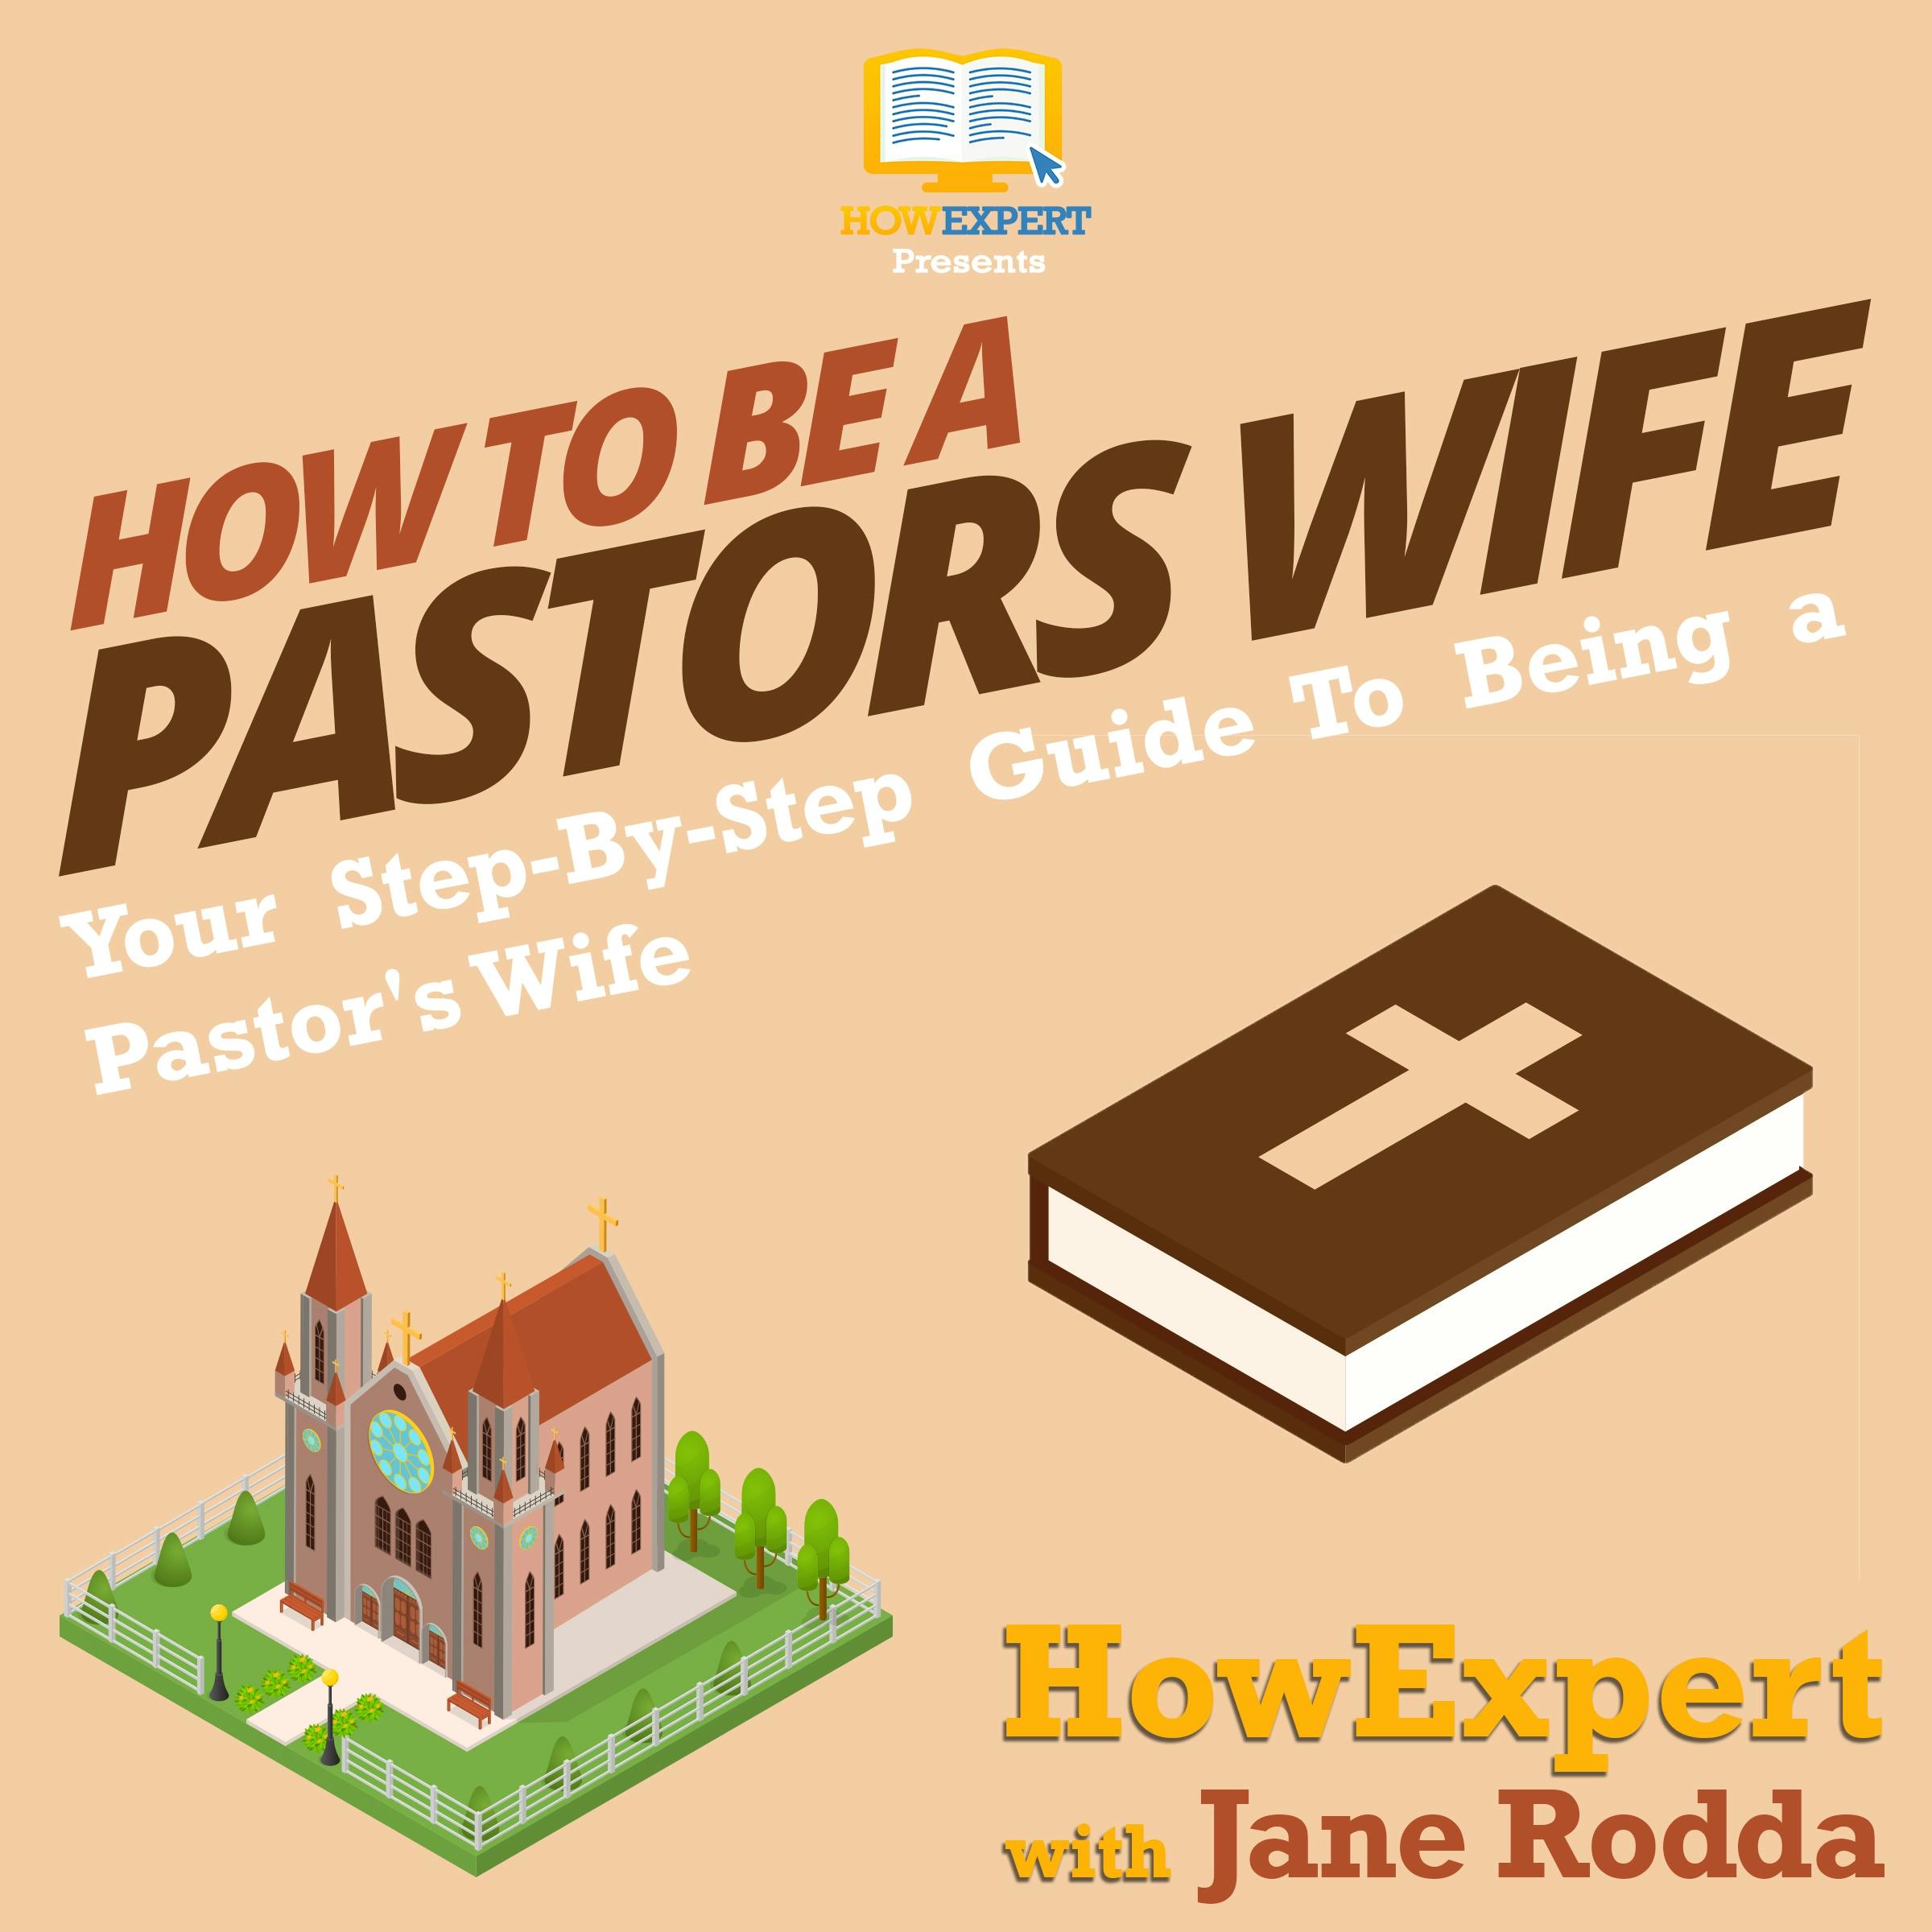 How To Be a Pastor's Wife: Your Step By Step Guide To Being a Pastor's Wife - Jane Rodda, HowExpert